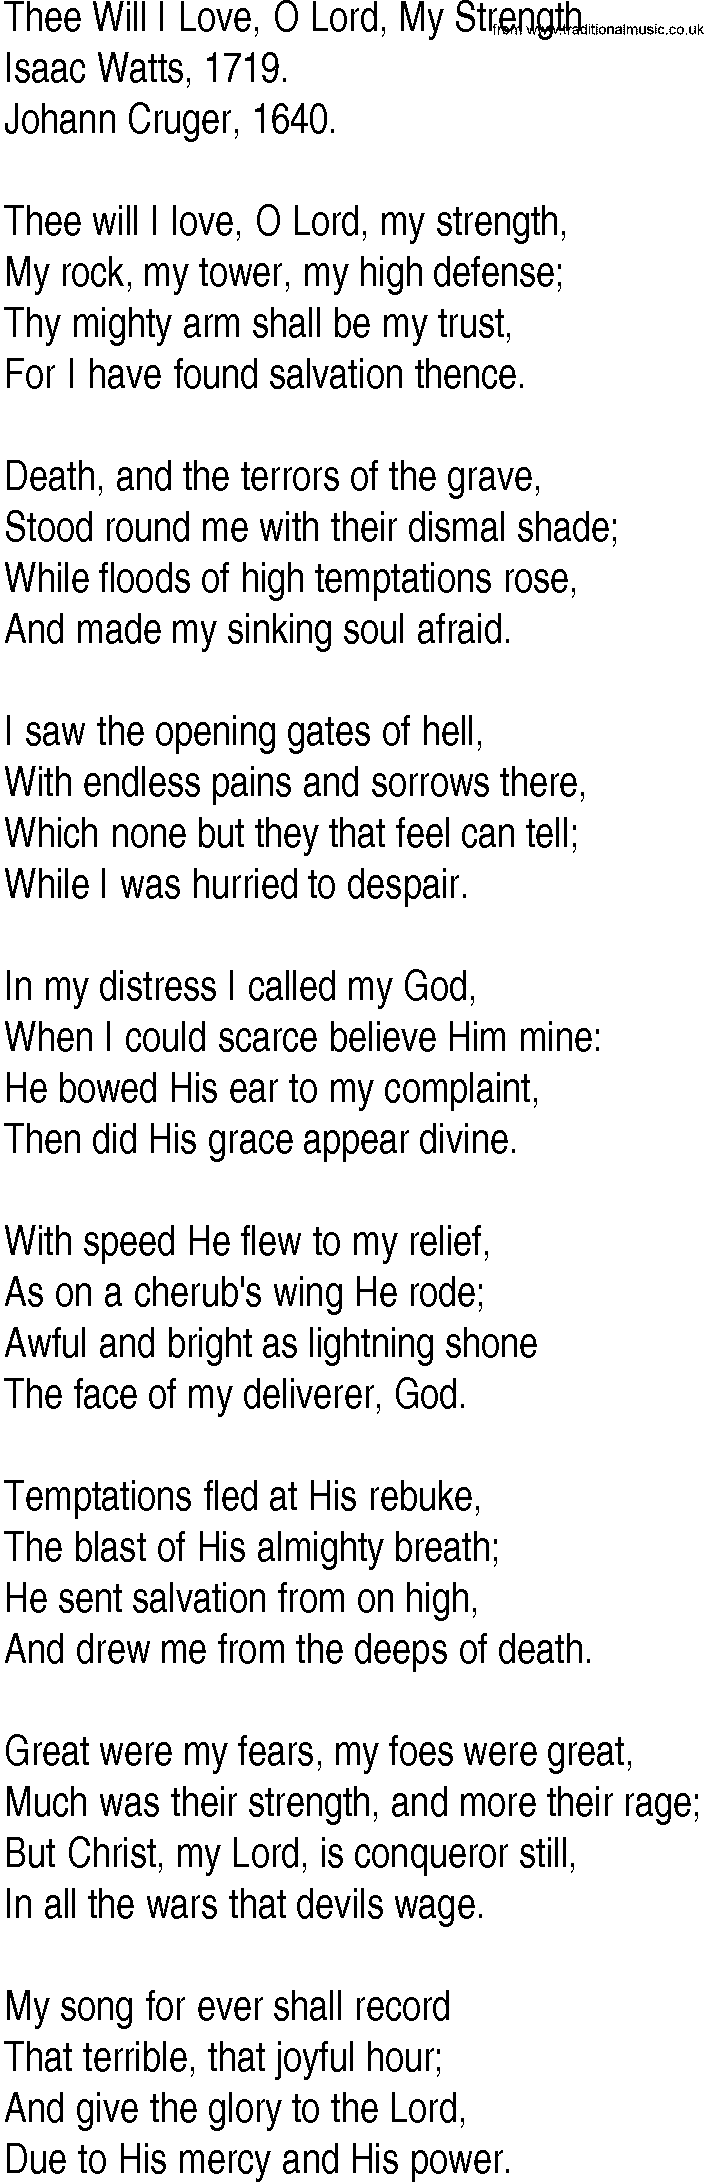 Hymn and Gospel Song: Thee Will I Love, O Lord, My Strength by Isaac Watts lyrics